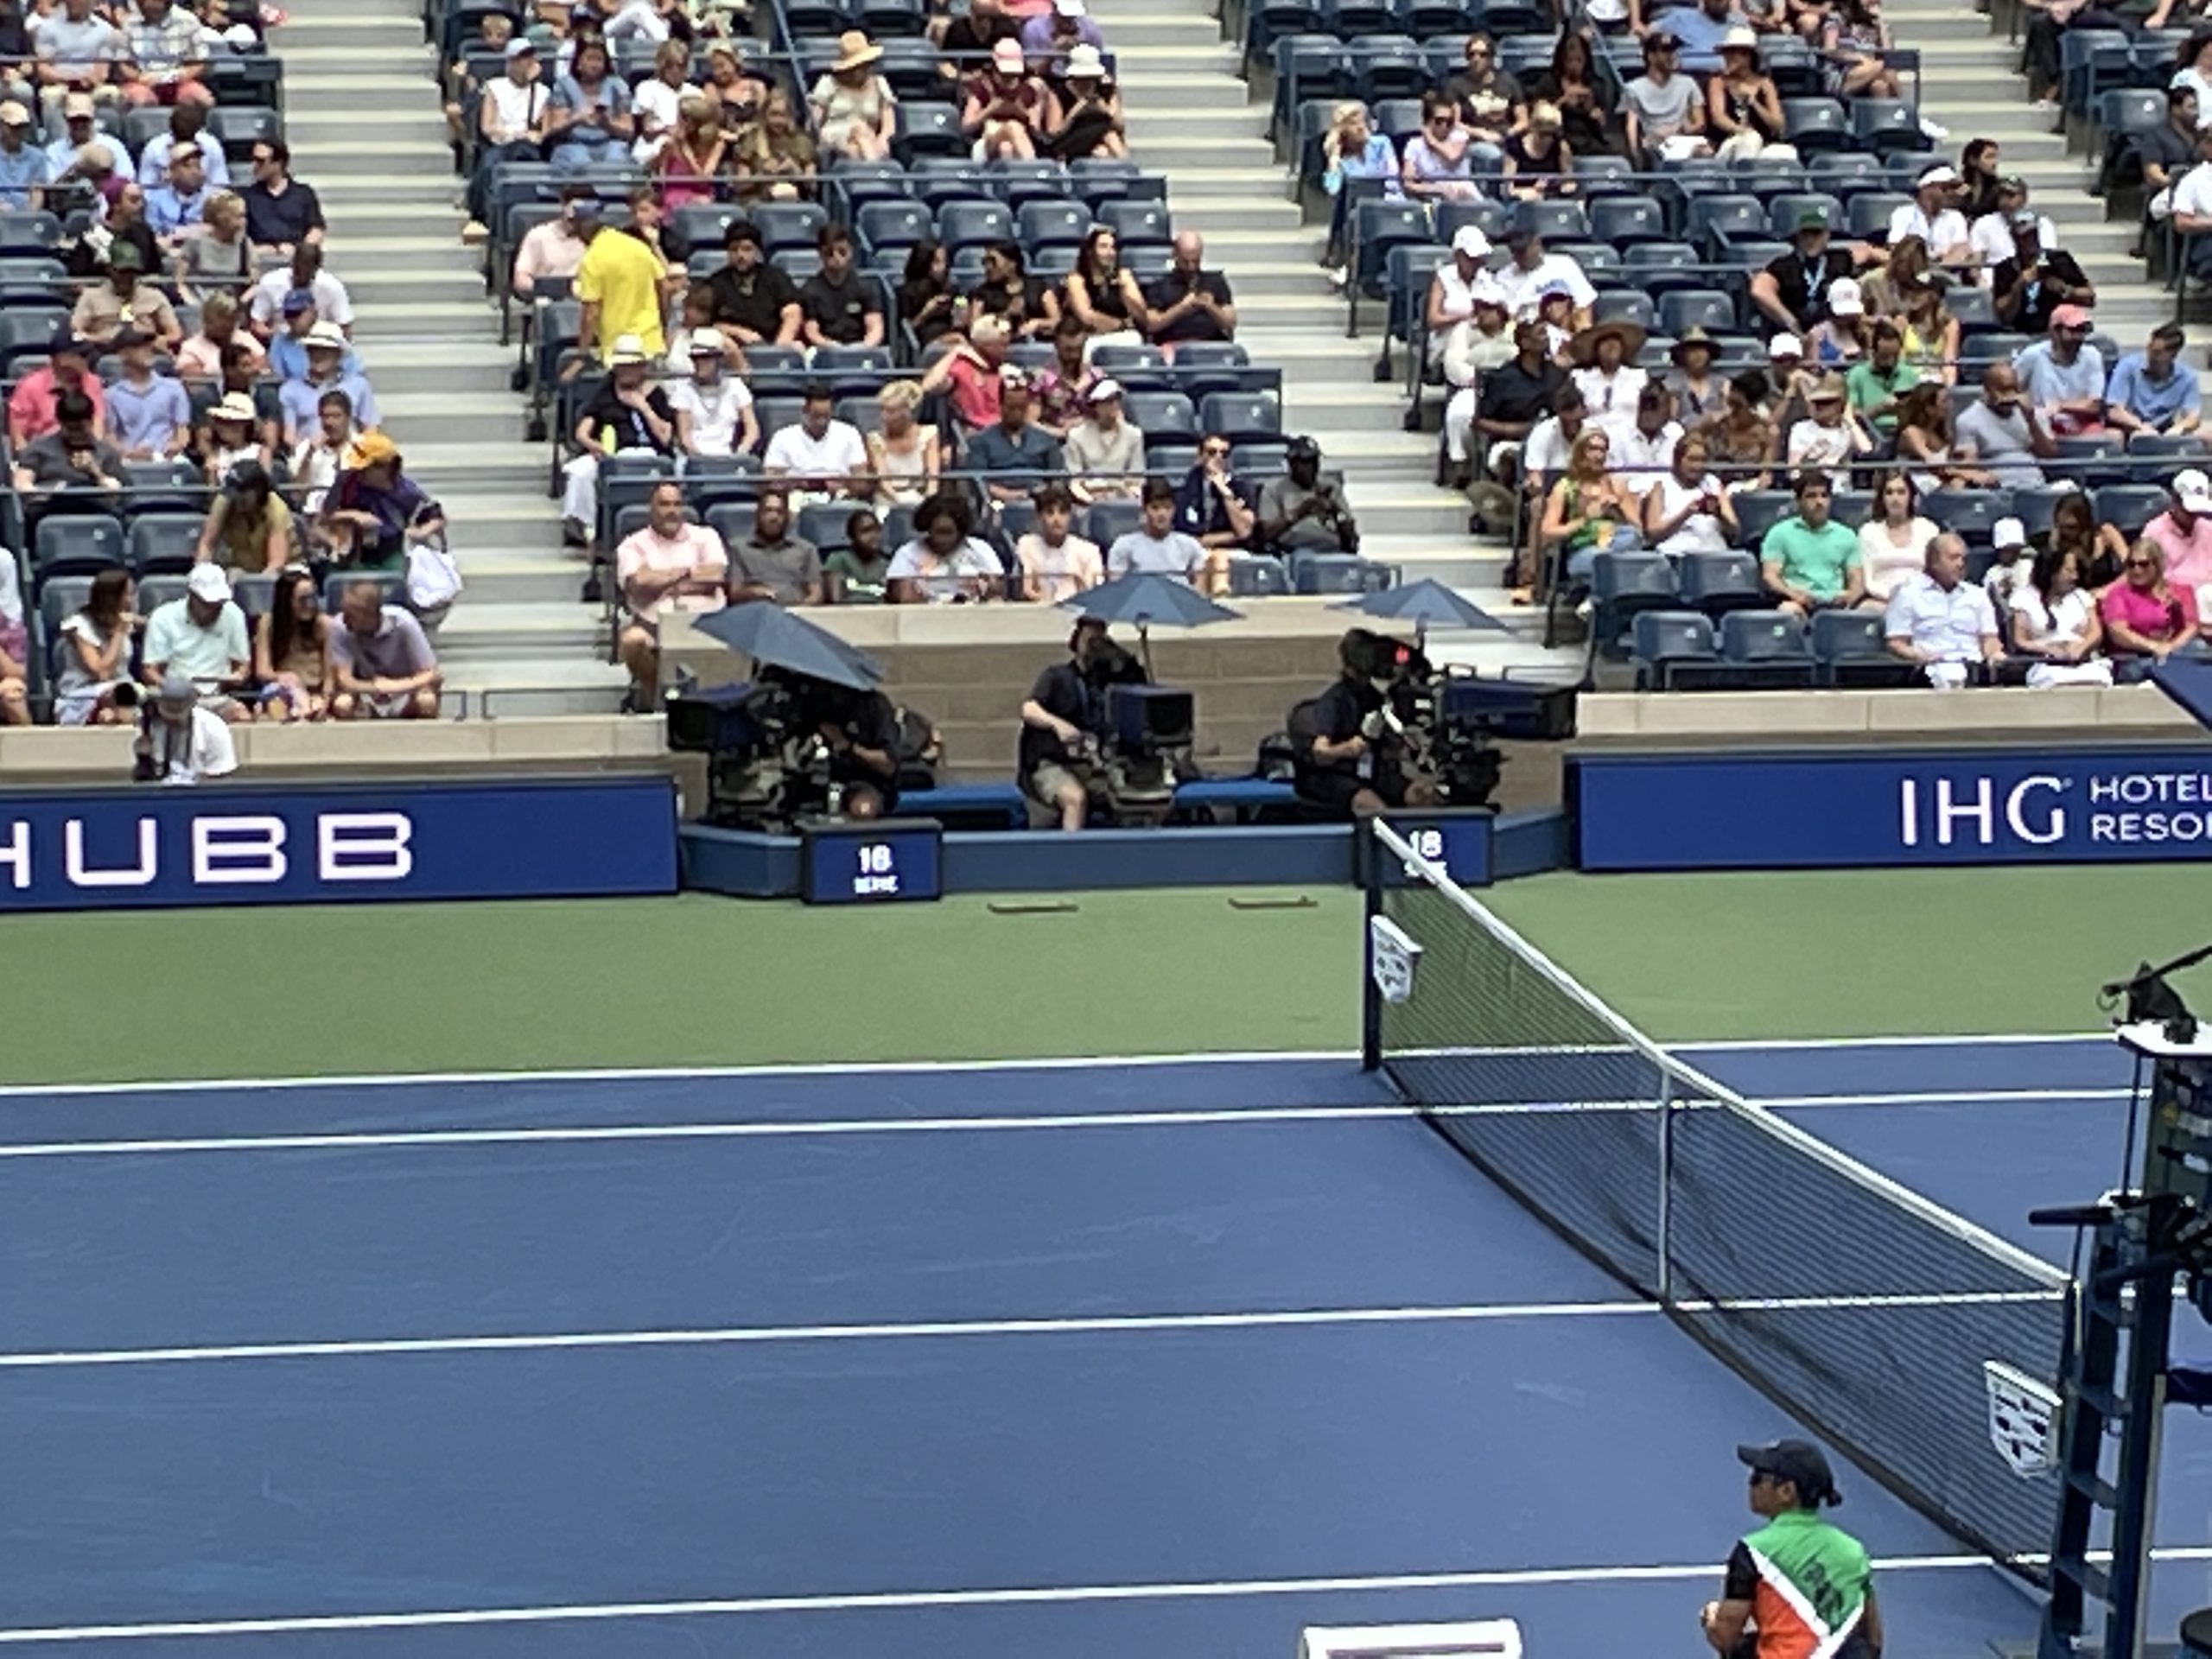 Live From US Open 2022: USTA Offers Seamless In-Venue Experience